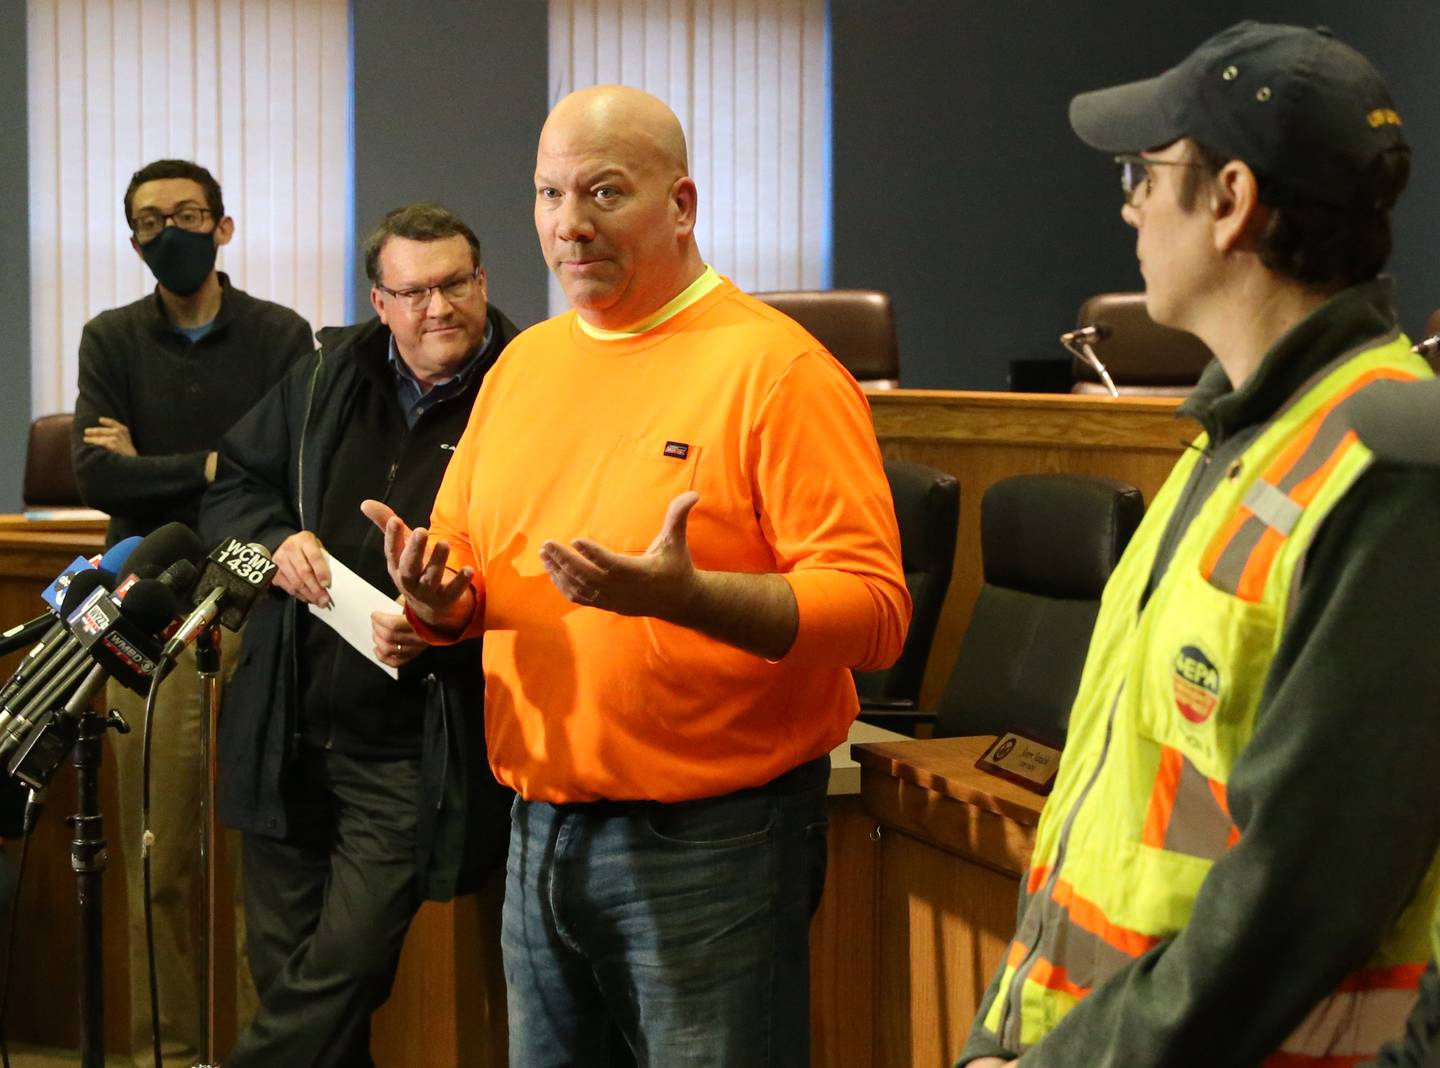 La Salle mayor Jeff Grove (center) takes questions from the media during a press conference on Wednesday, Jan. 11, 2023 at La Salle City Hall.